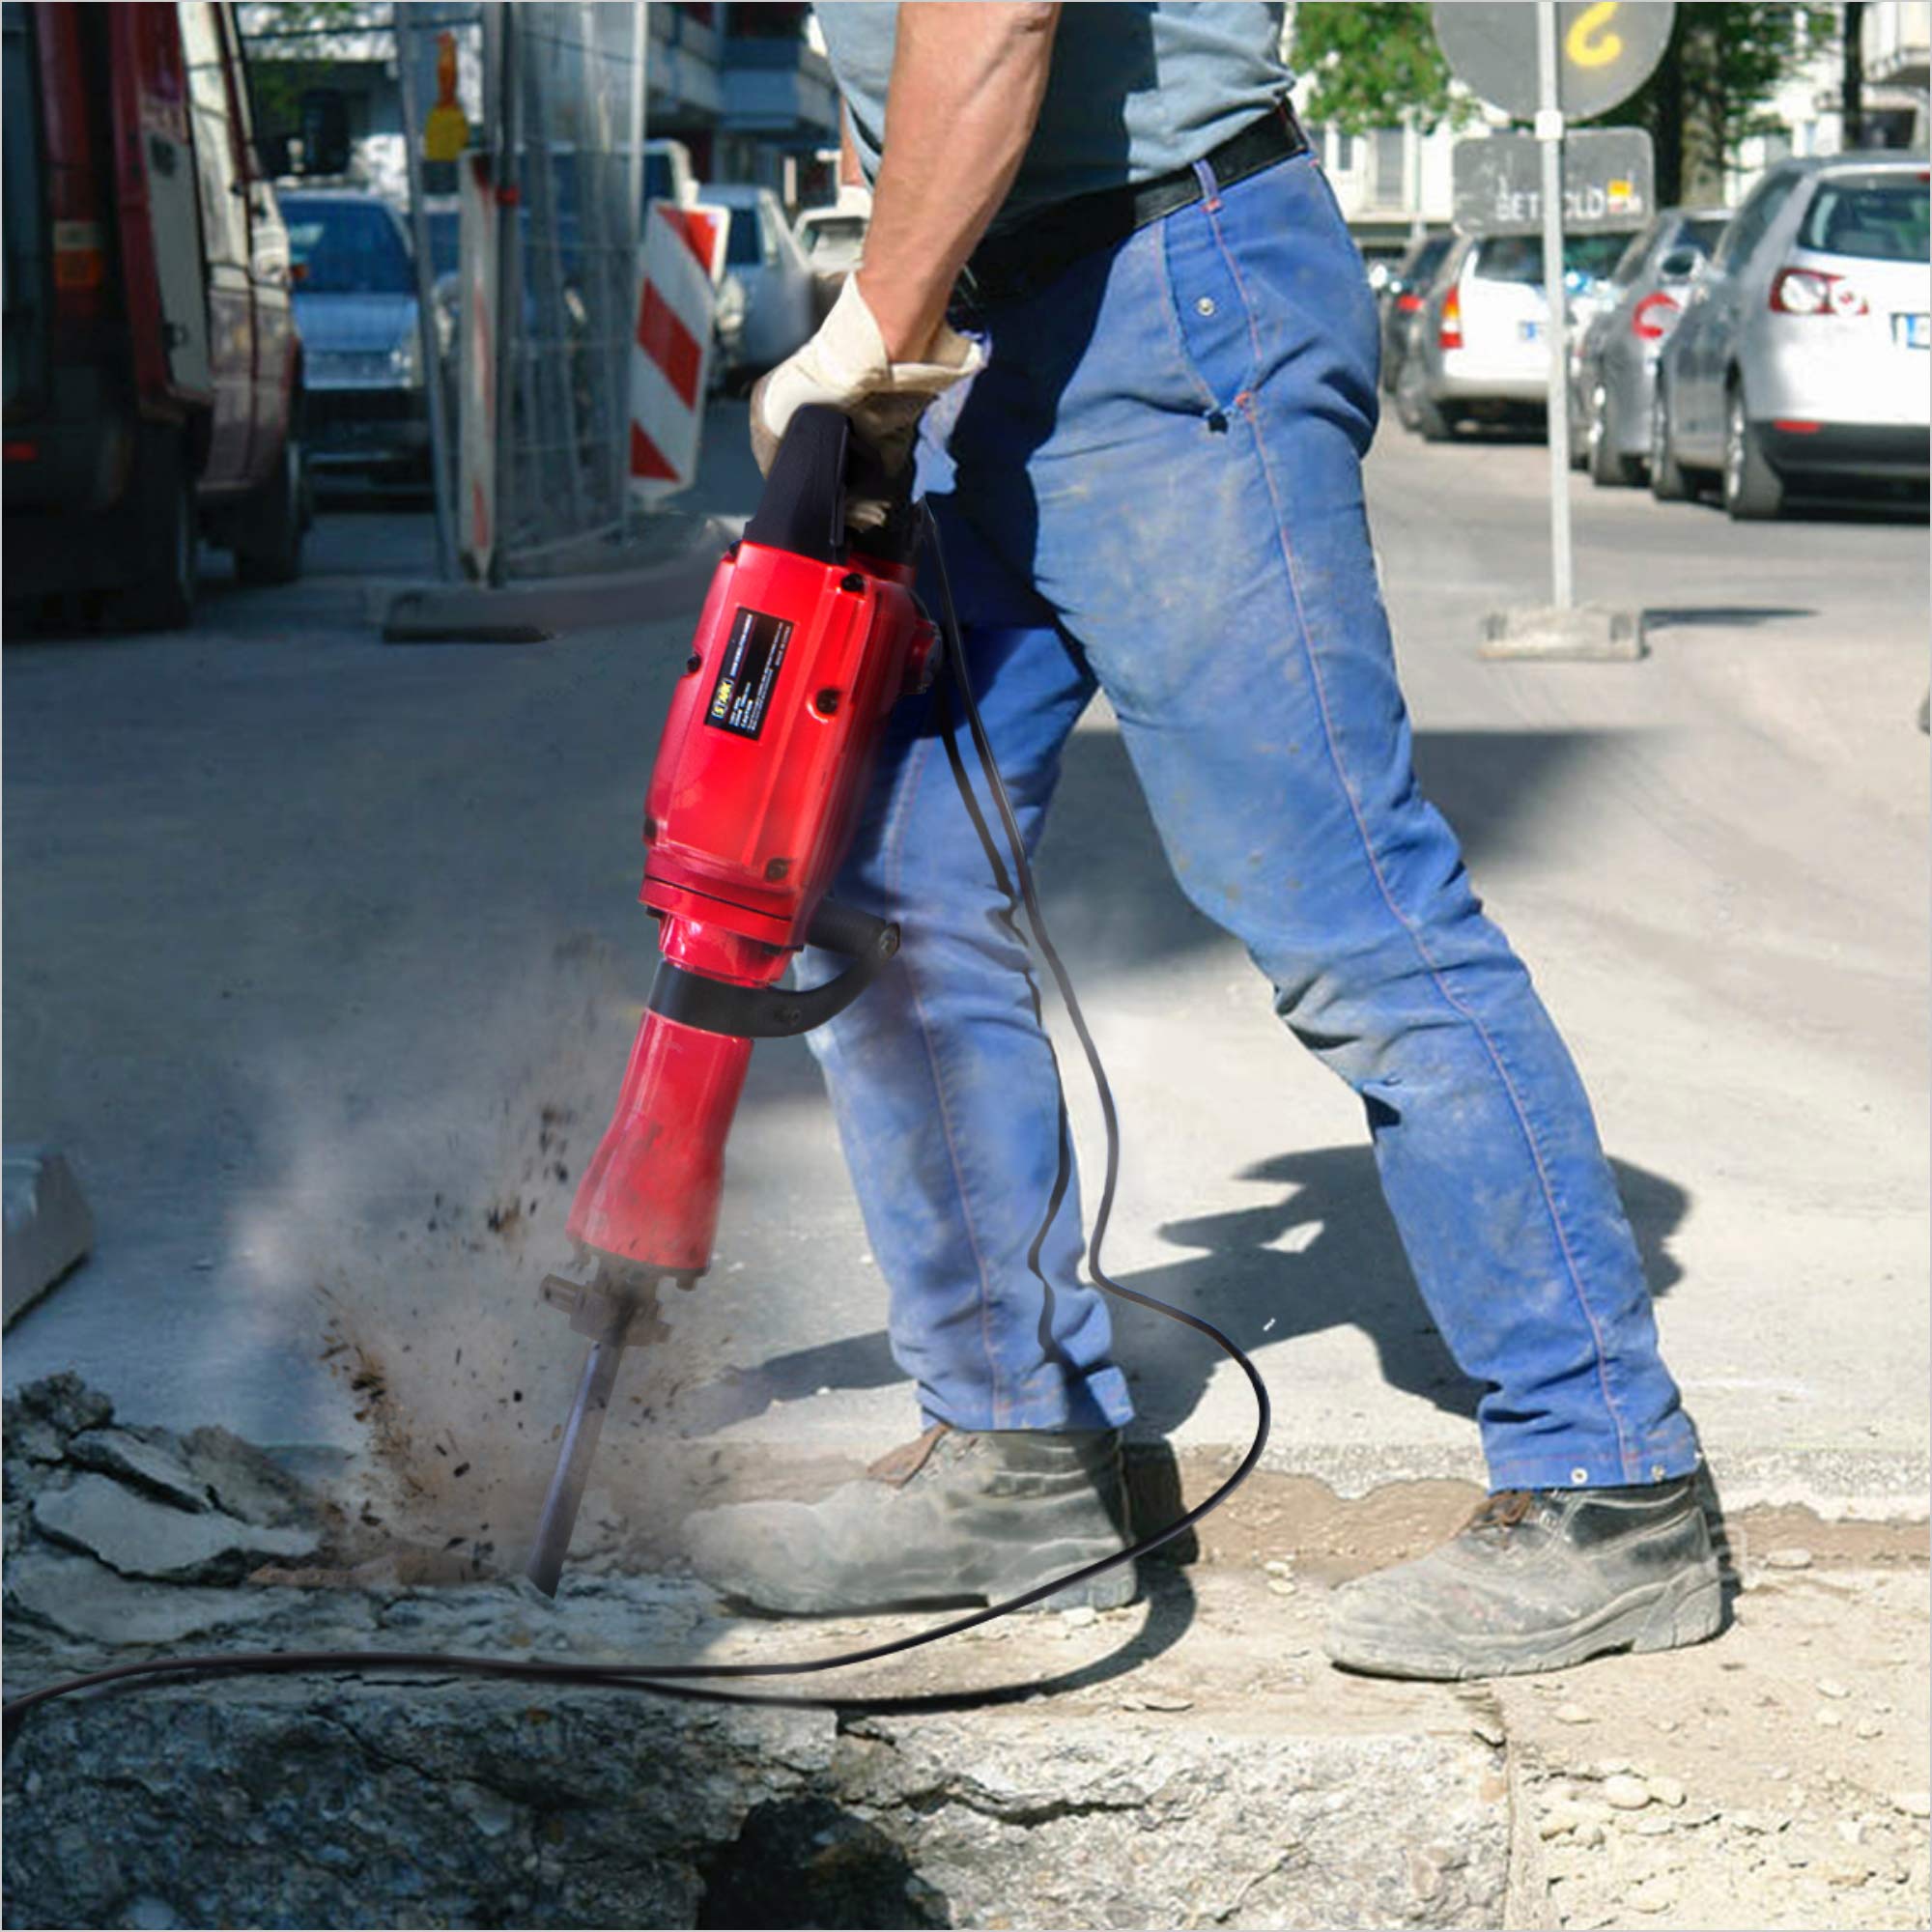 How to Use a Jackhammer Safely & Efficiently - The Home Depot